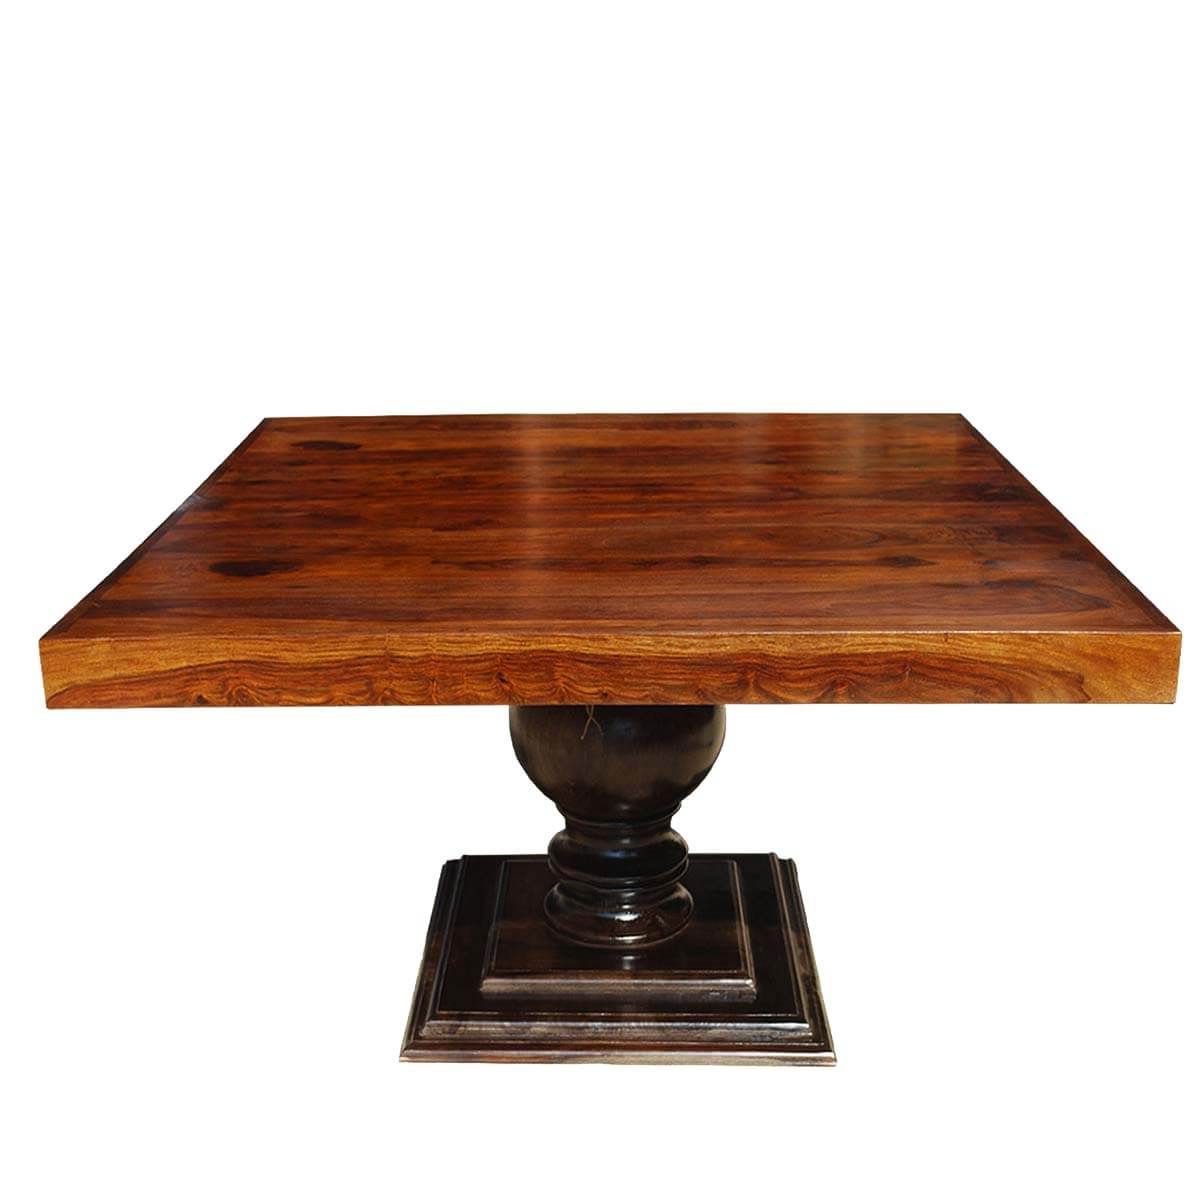 Sevinc Pedestal Dining Tables Throughout Well Liked Minneapolis Rustic Solid Wood Fusion Pedestal Square (View 7 of 20)